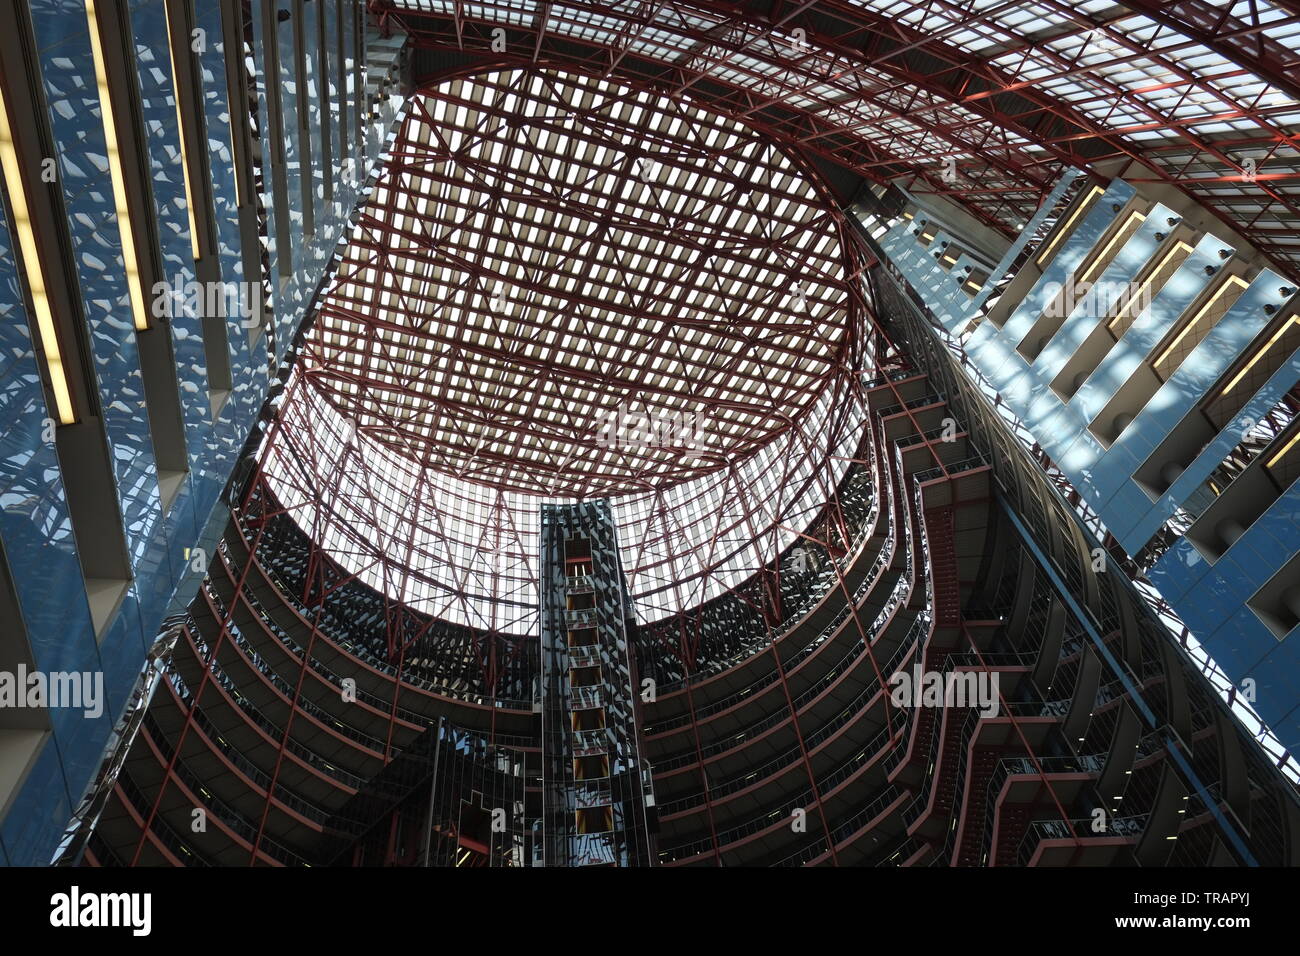 The James R. Thompson Center is located at 100 W. Randolph Street in the Loop district of Chicago and houses offices of the Illinois state government Stock Photo